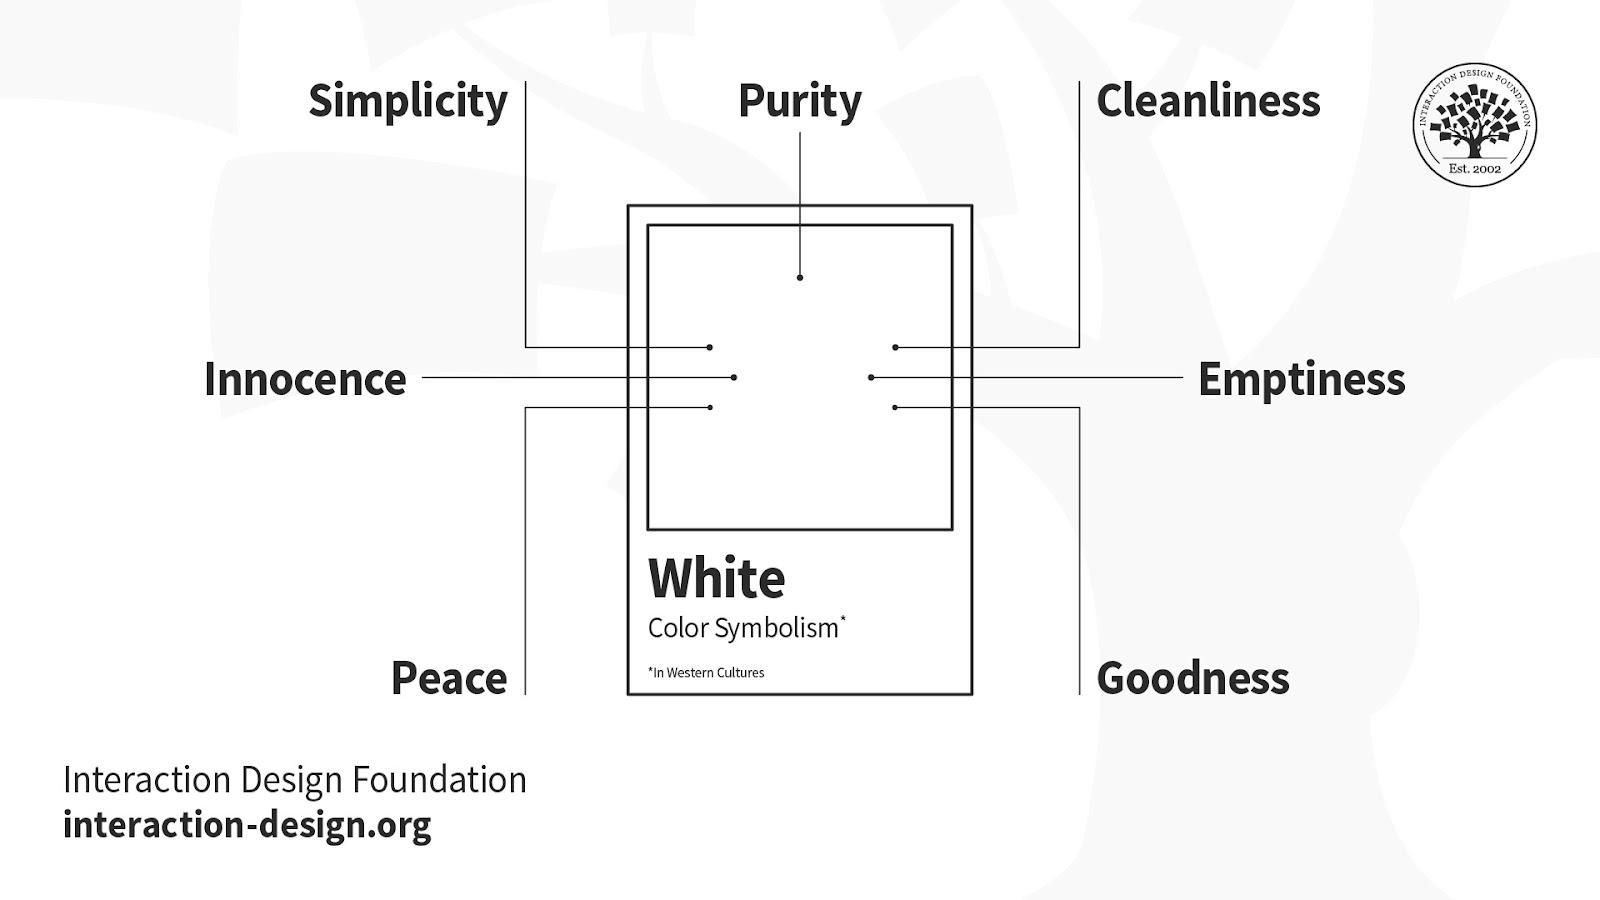 Illustration depicting key words symbolized by the color white